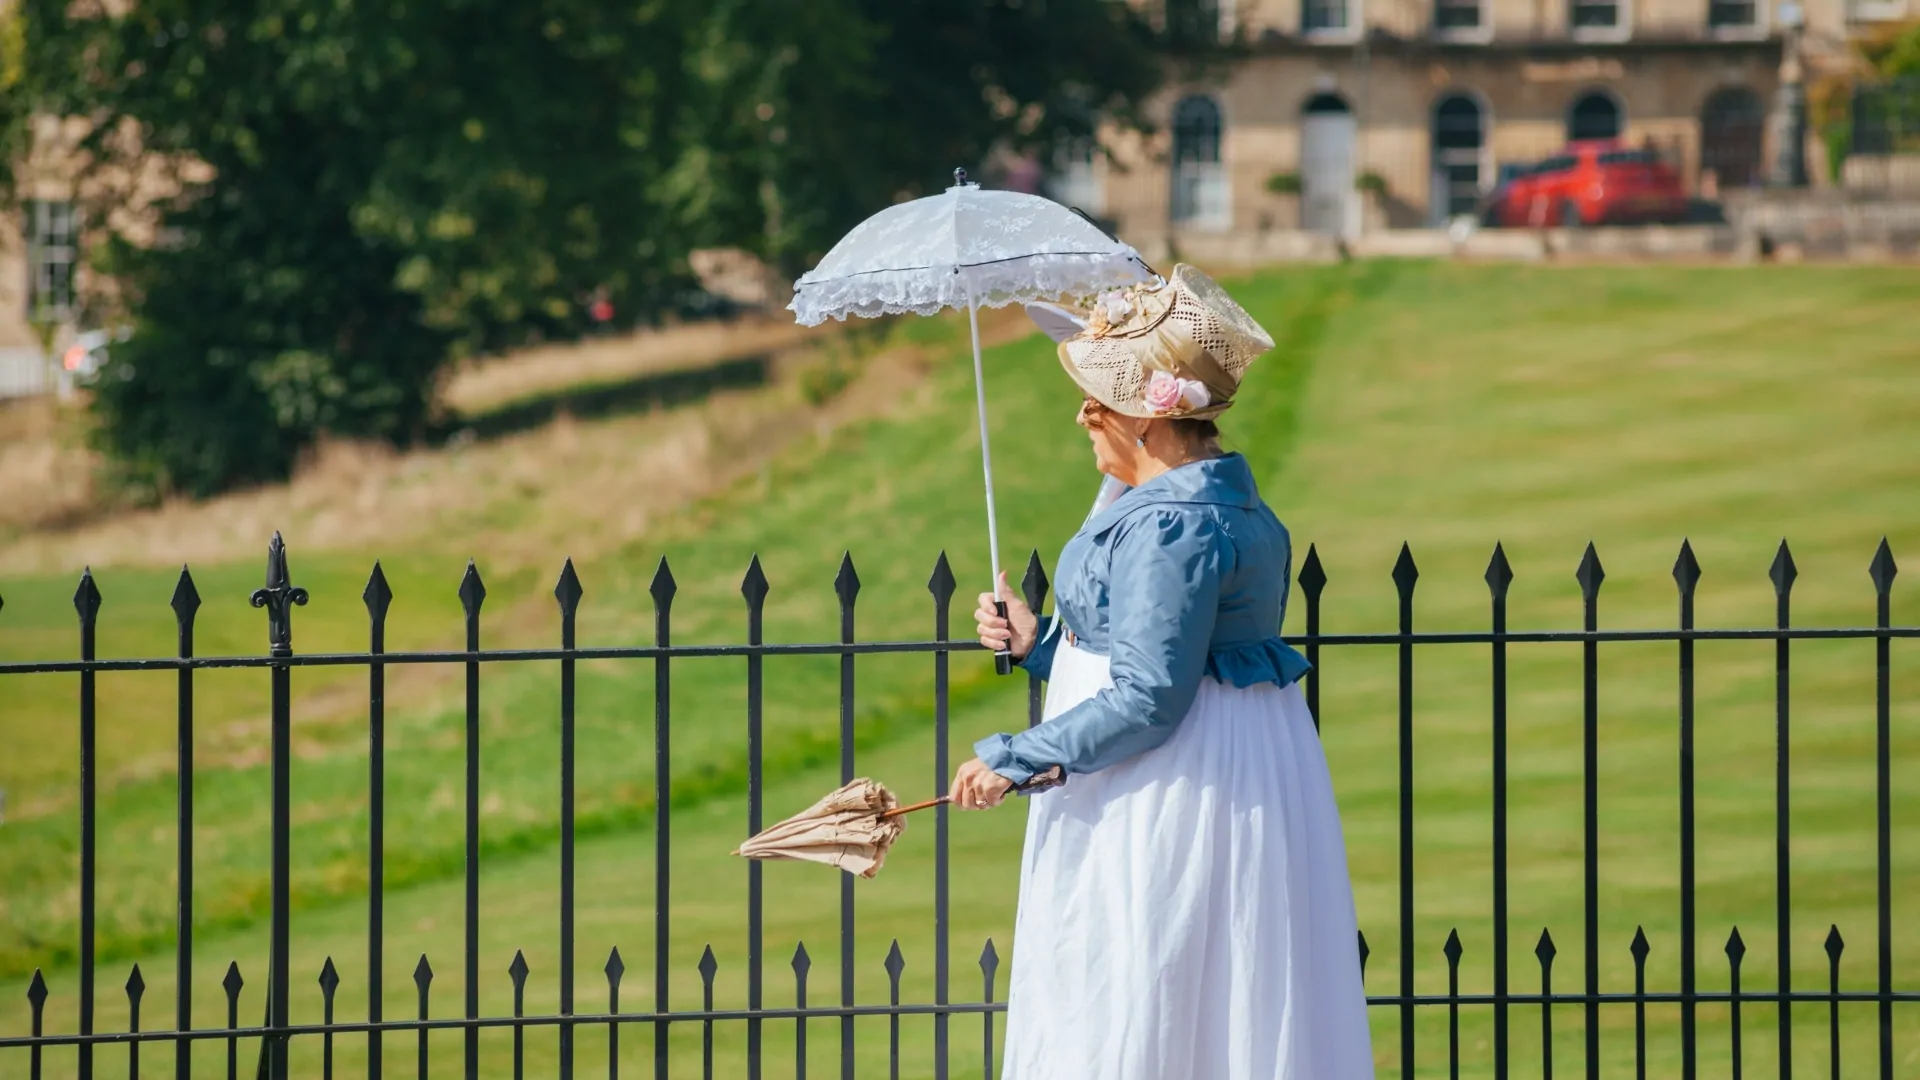 Two women in period clothing dress from the Jane Austen era. We see them from their side profiles in front of railings with green grass behind.